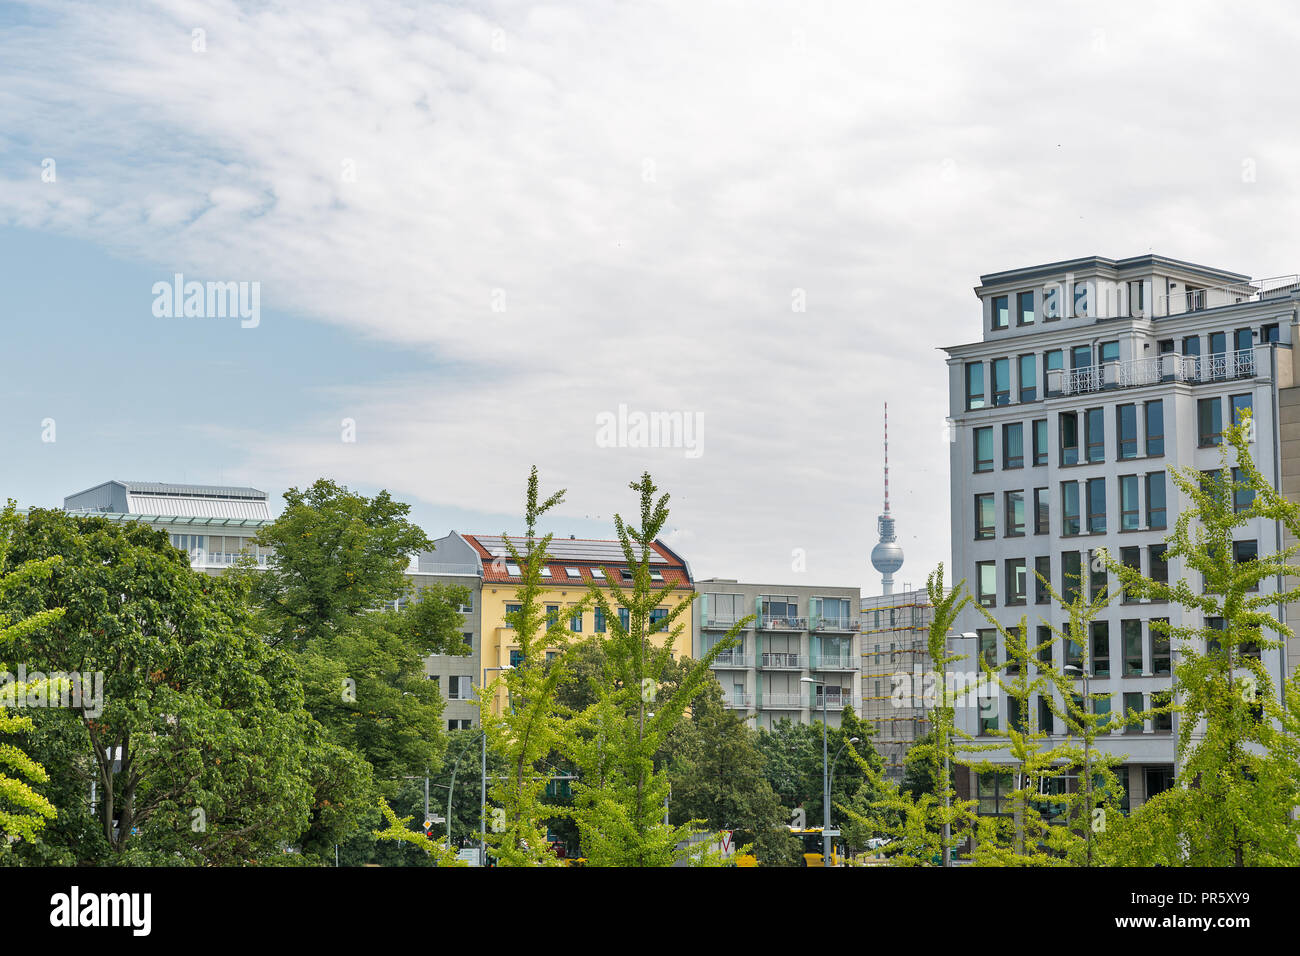 cityscape of the Mitte district in Berlin, Germany with the Berliner Fernsehturm, the popular television tower in the background Stock Photo